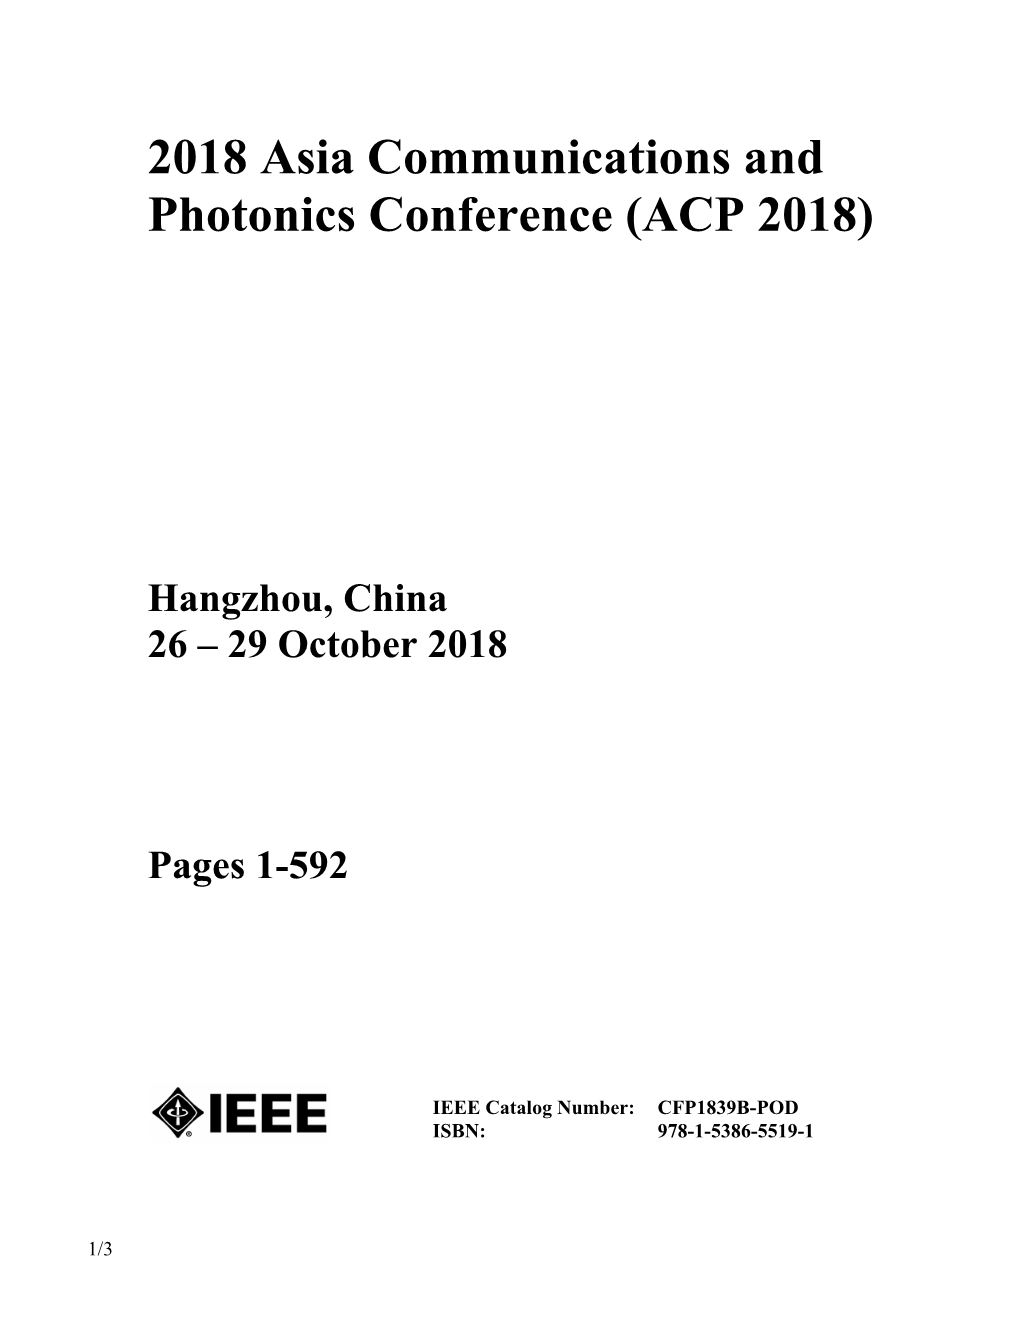 2018 Asia Communications and Photonics Conference (ACP 2018)